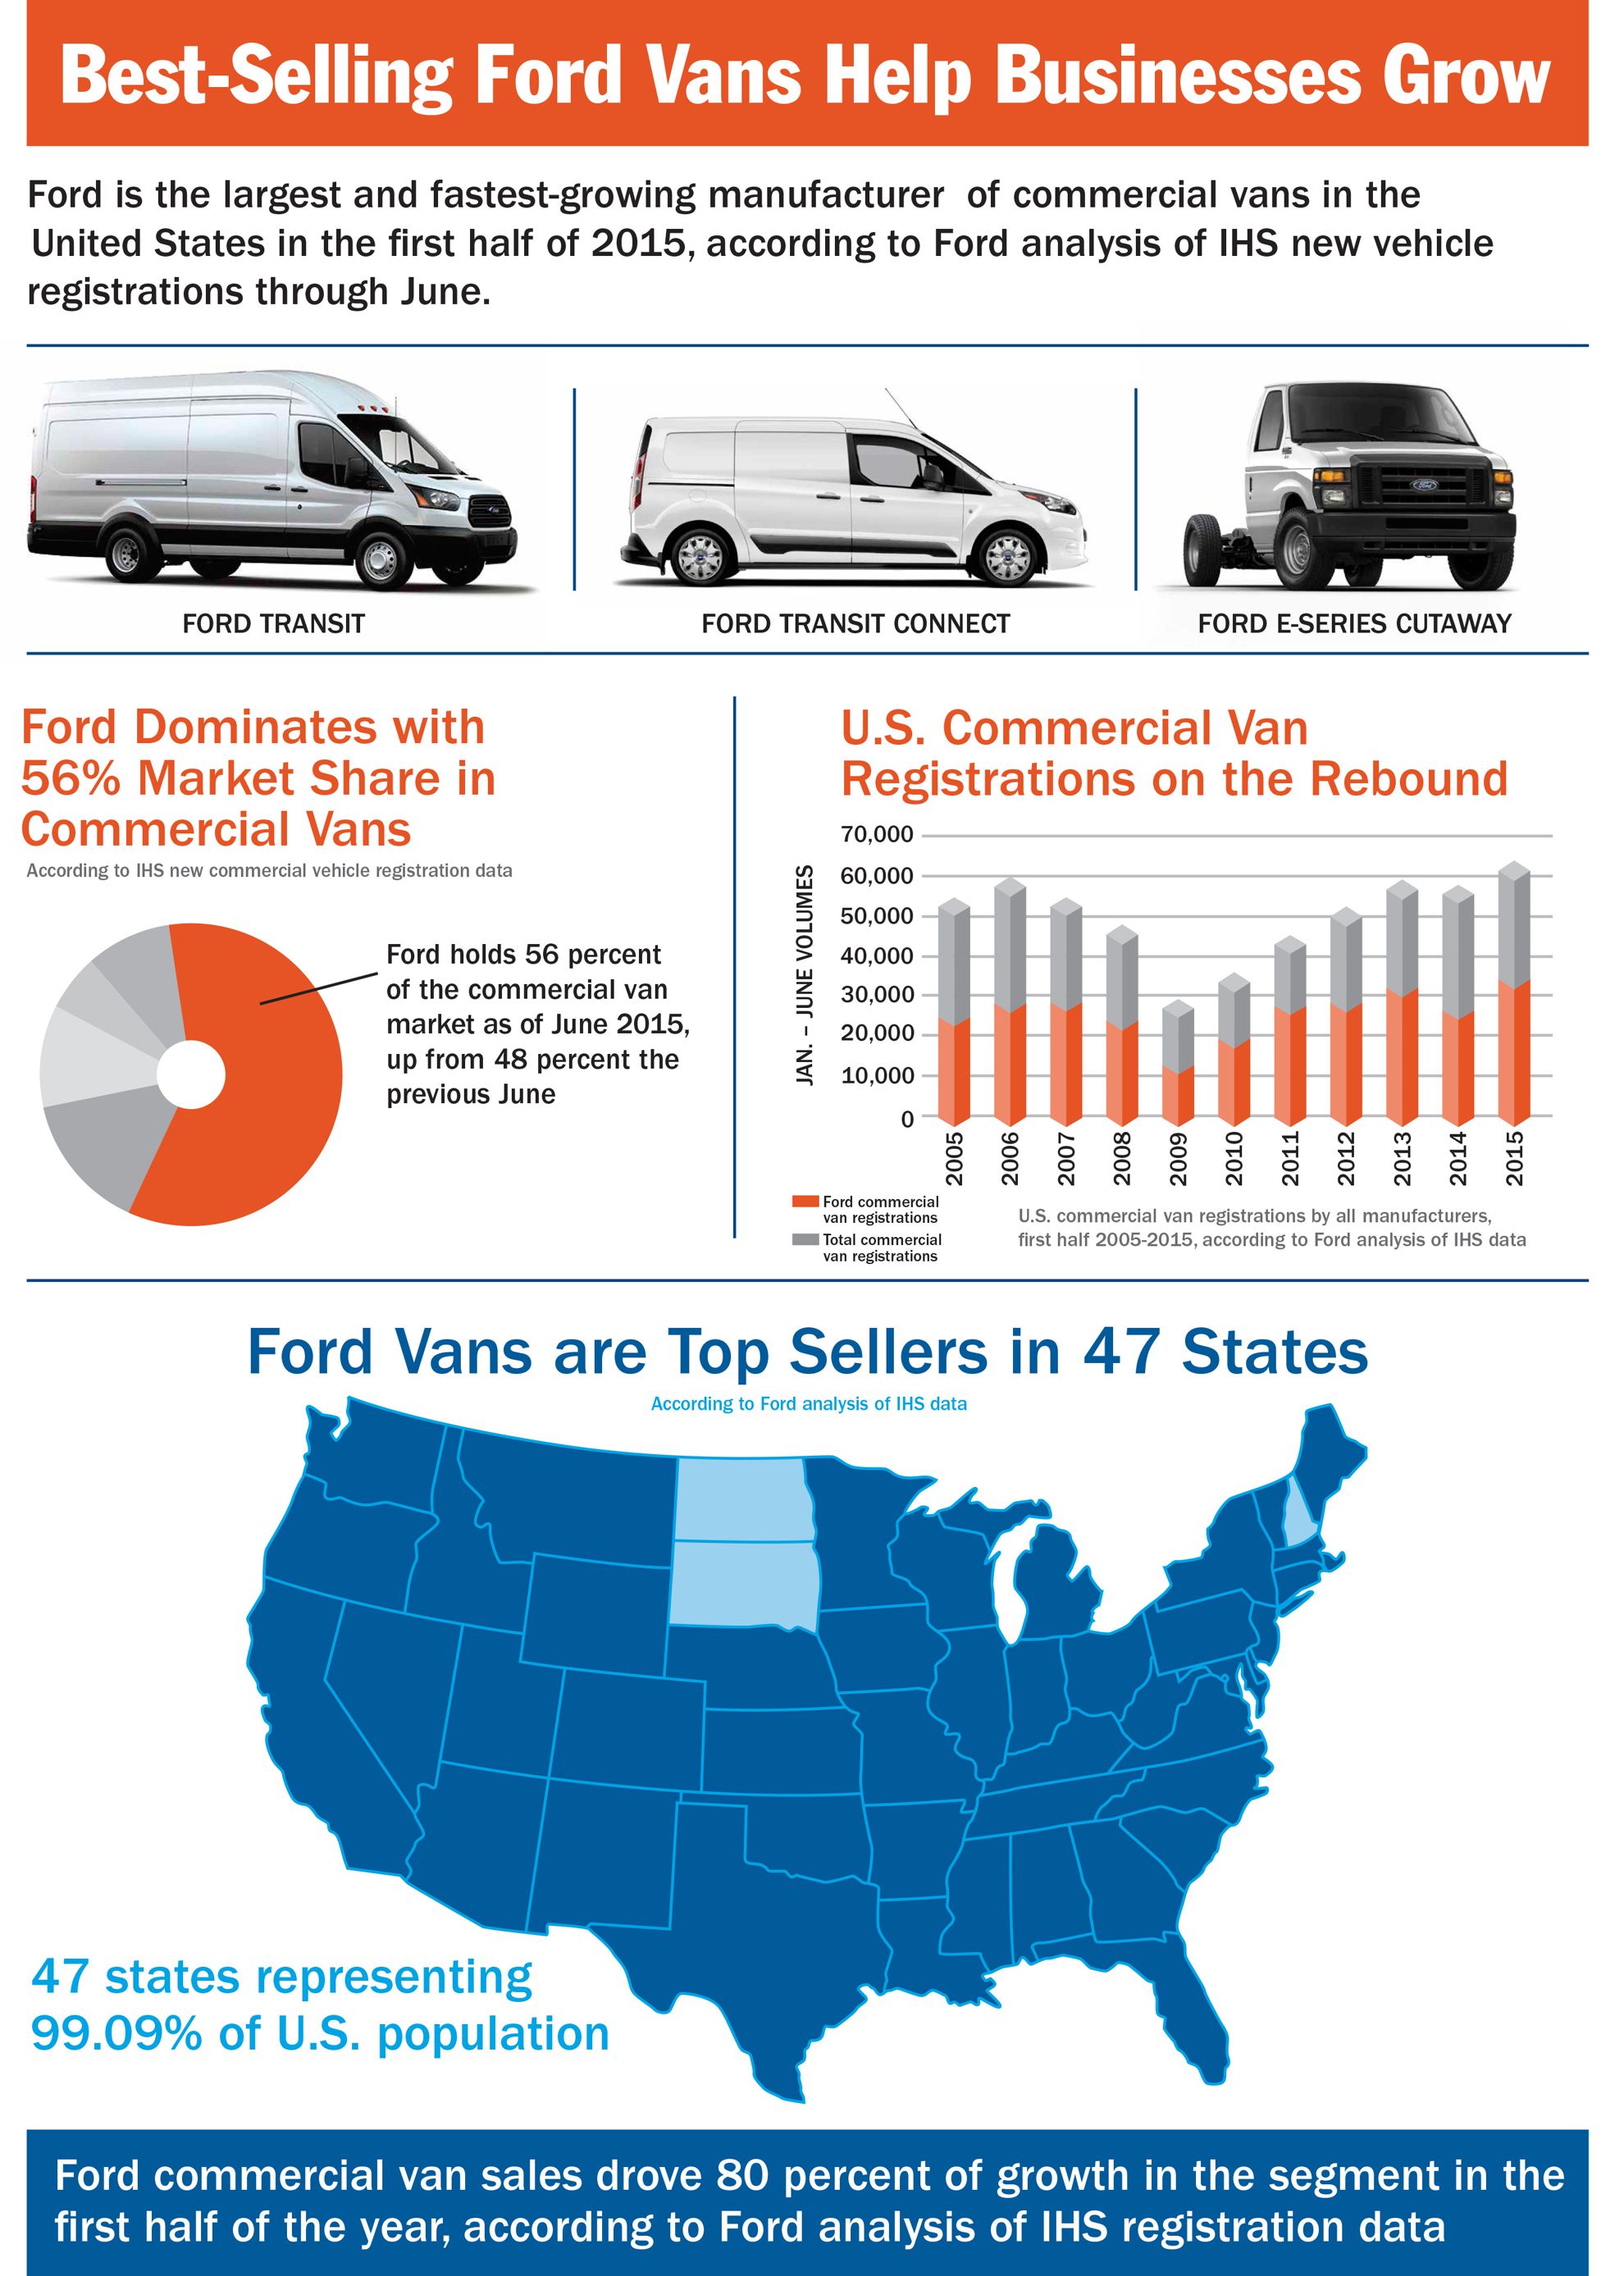 USA Businesses turns to Ford Vans as Economy Grows